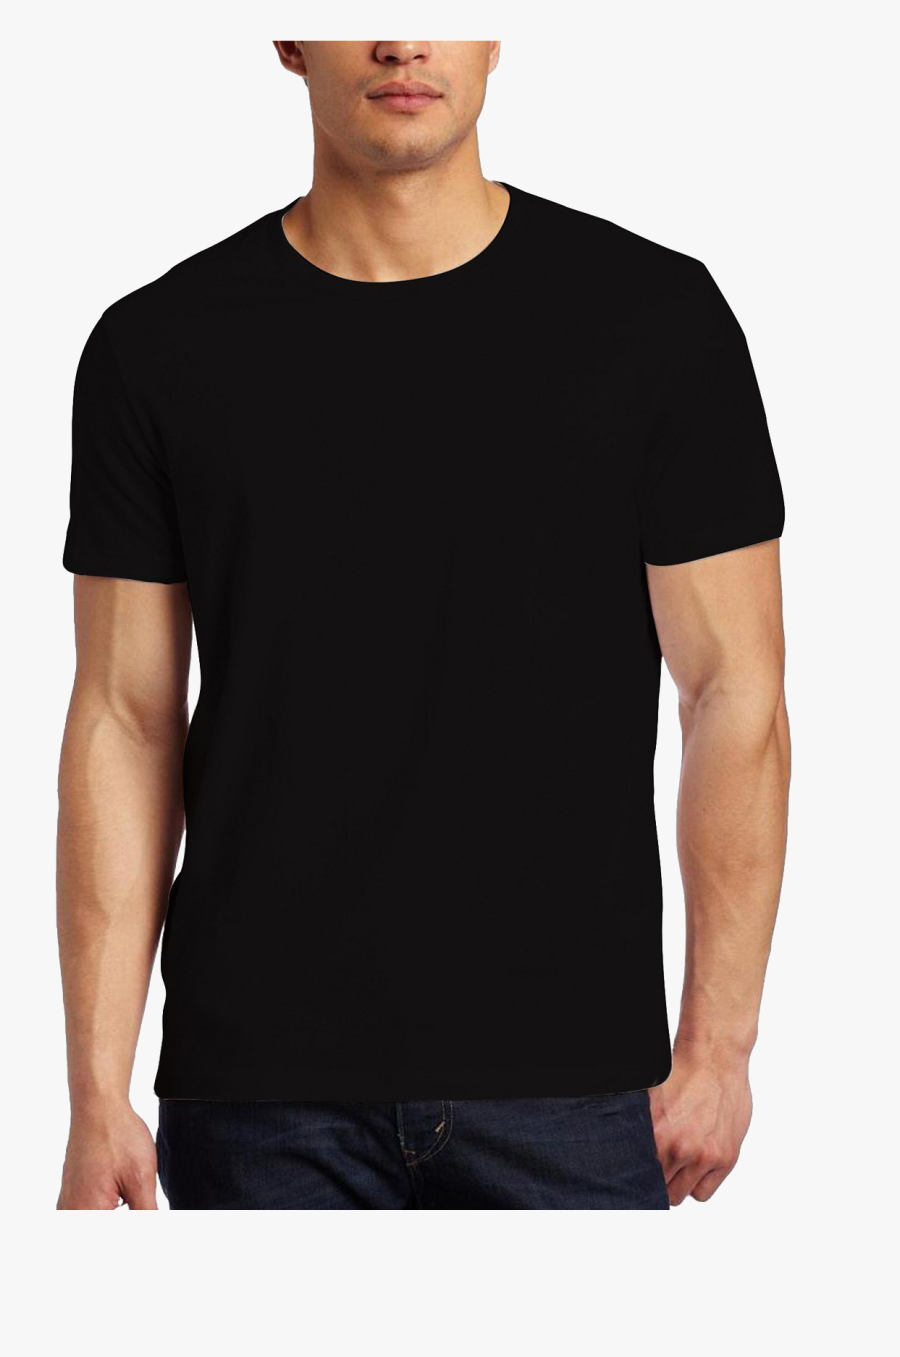 Black T Shirt Png Image Background Real Black T Shirt Template Free Transparent Clipart Clipartkey - roblox muscle t shirt png vector library download free png images vector psd clipart templates